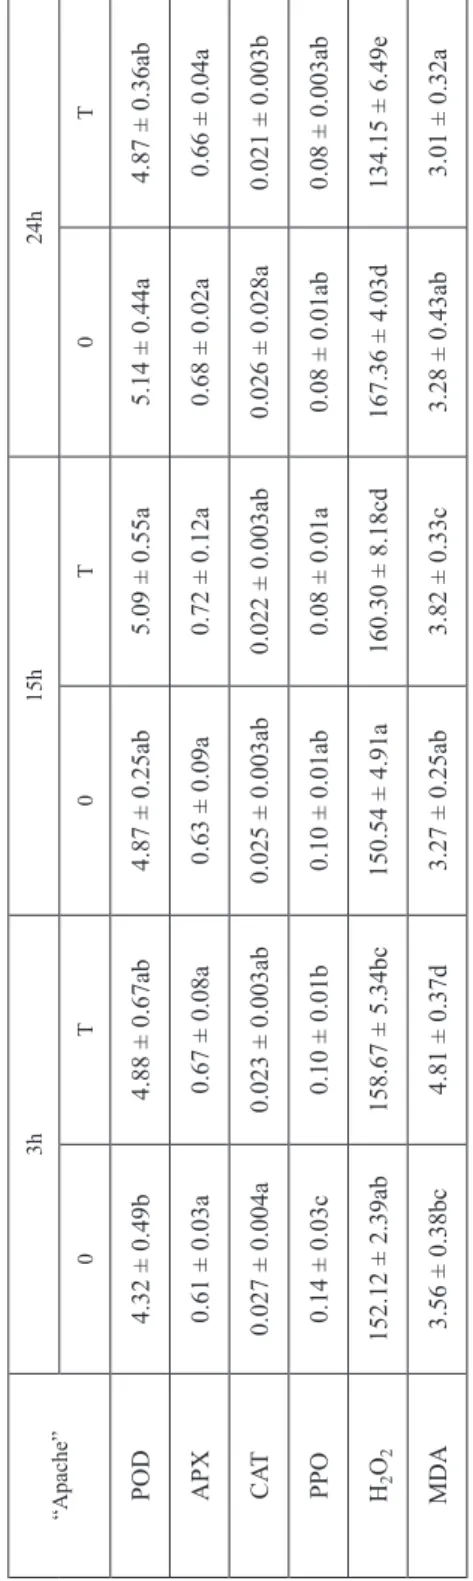 Table 3c Effects of Fusarium spp. on activity of antioxidative enzymes, MDA content and H 2O2 concentration in genotype “Apache” at 3, 15 and 24 hours in control (0) and treated (T) plants “Apache”3h15h24h 0T0T0T POD4.32 ± 0.49b4.88 ± 0.67ab4.87 ± 0.25ab5.